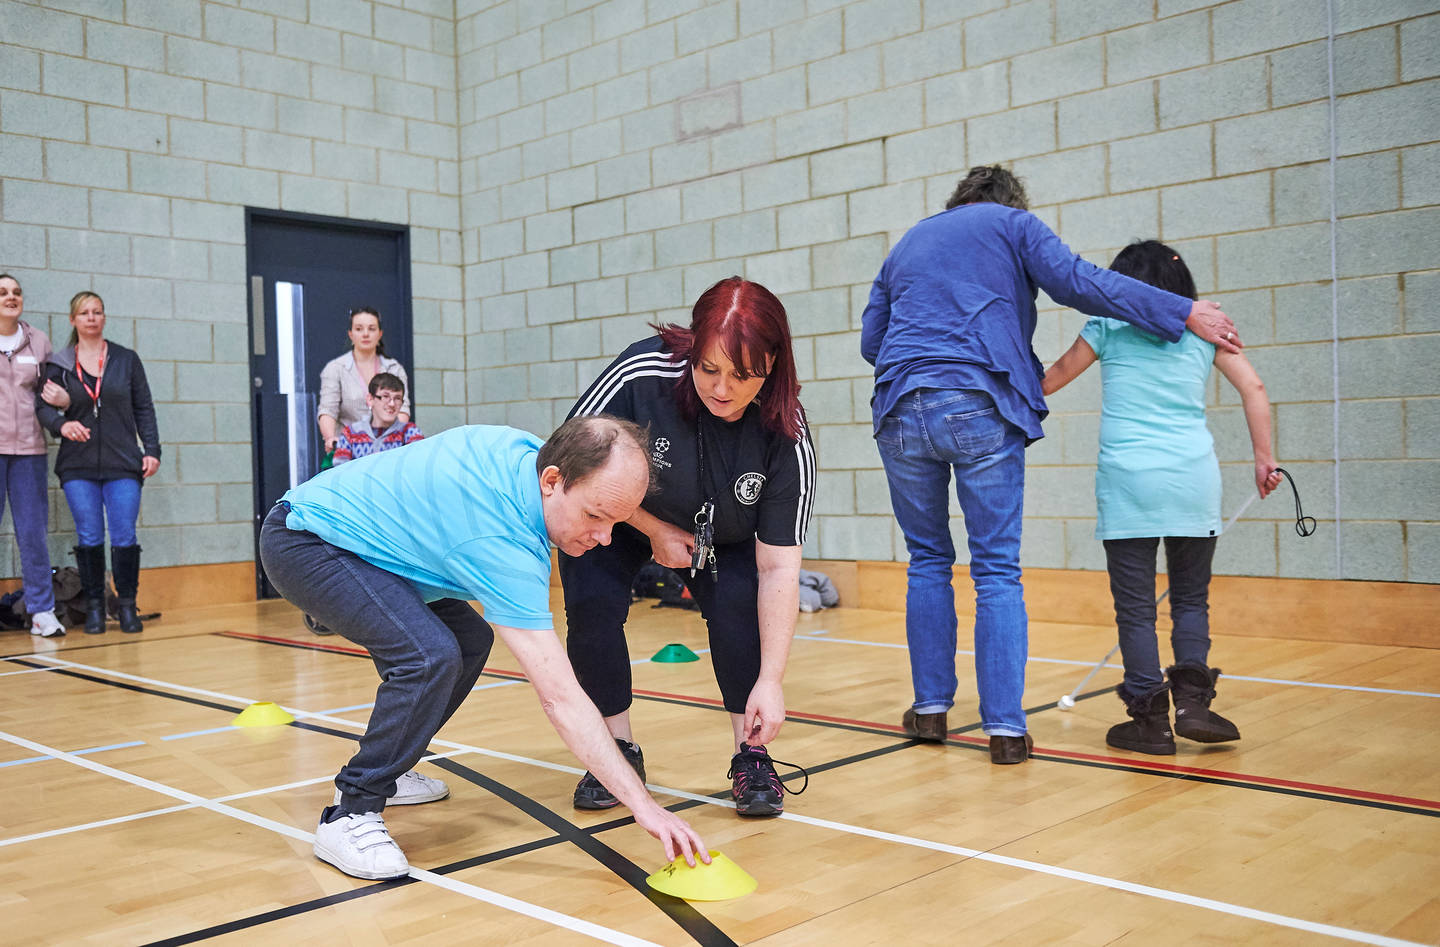 A sporting sessions with people with sensory impairments